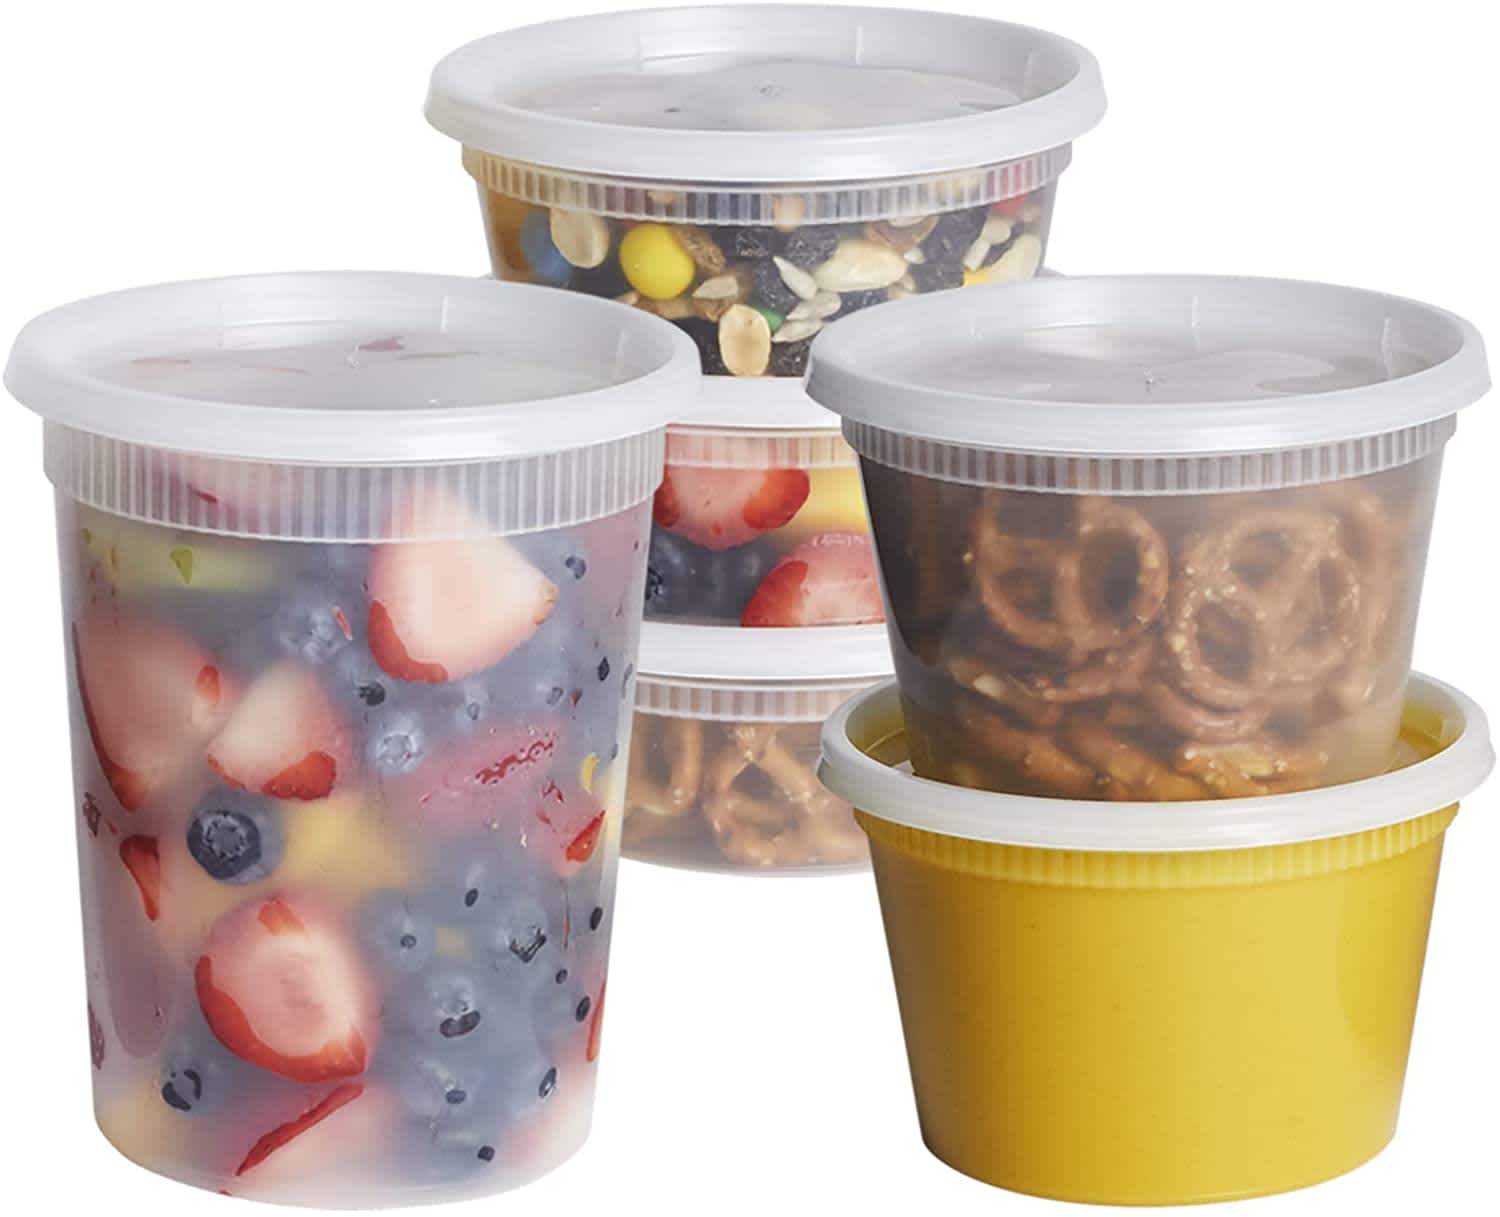 Guide to Care for Plastic Containers - Are Deli Containers Dishwasher Safe